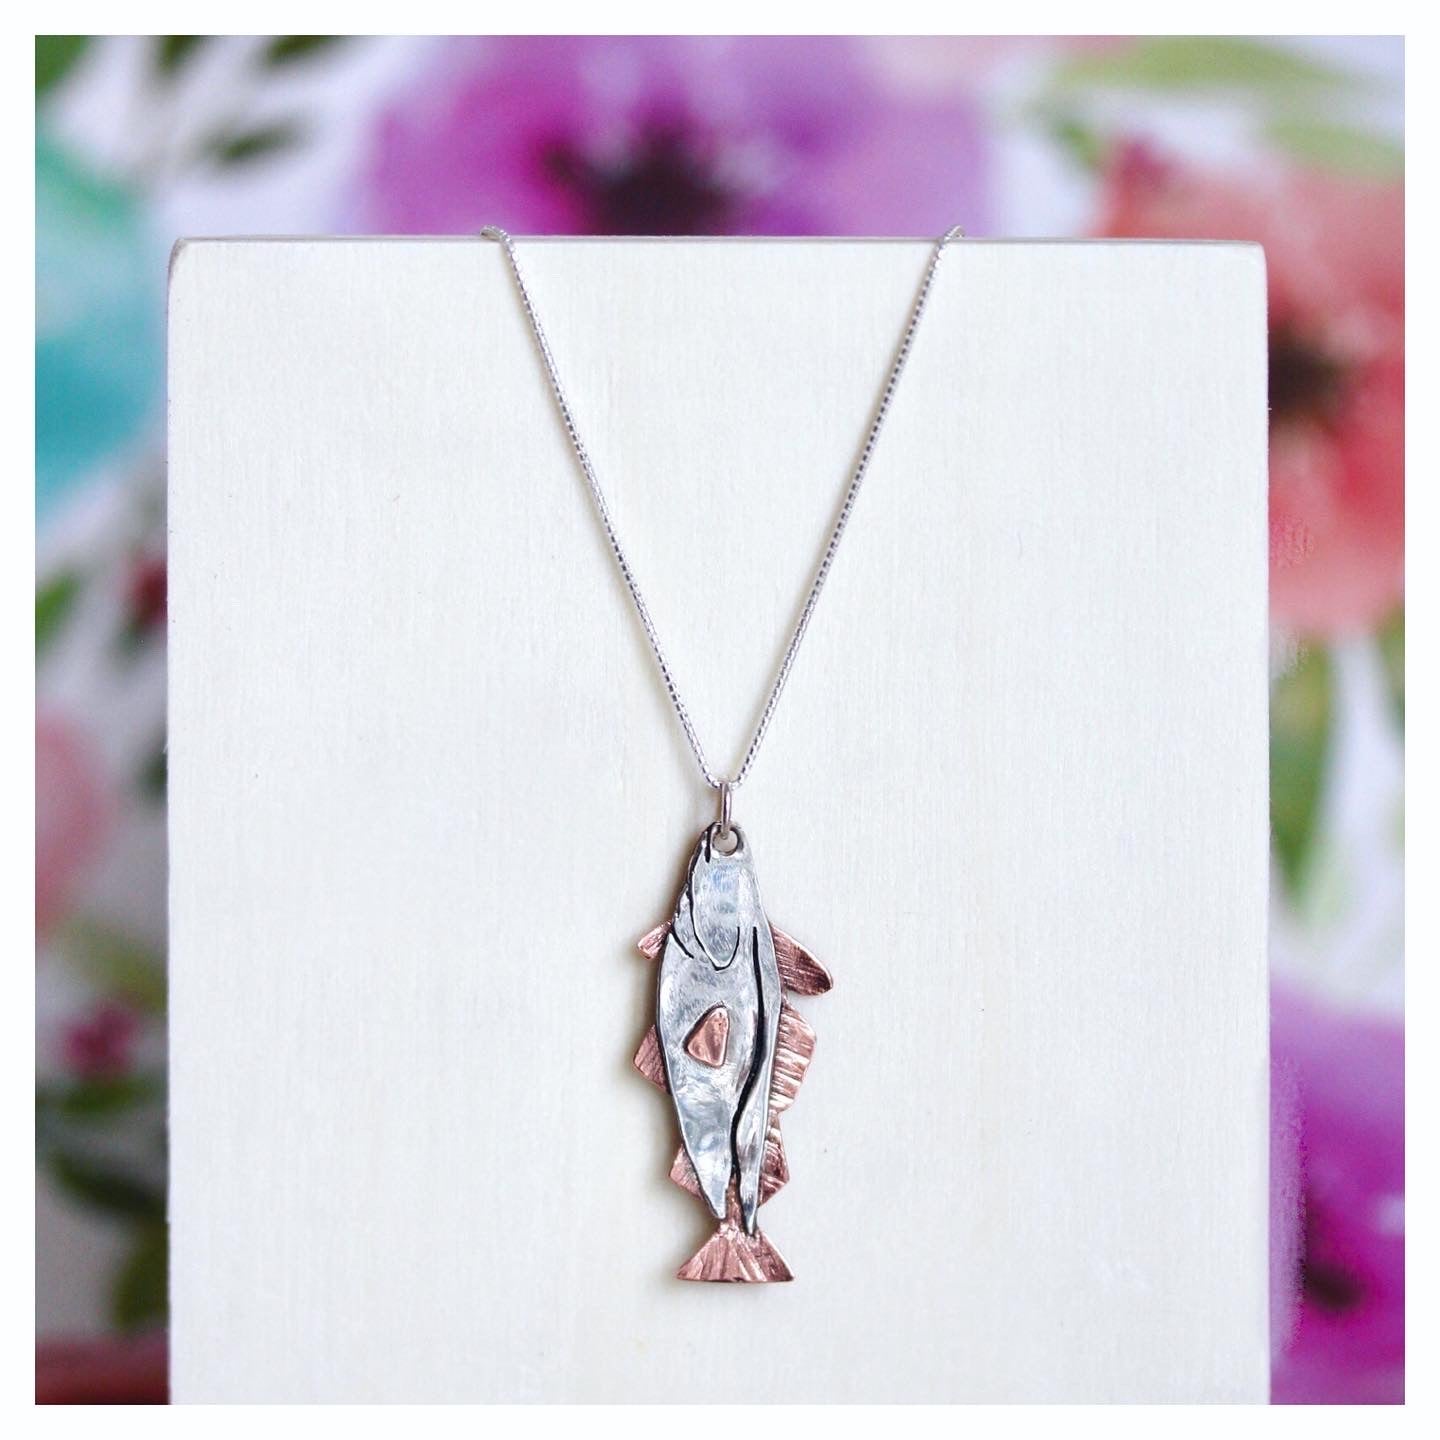 Hammered Cod Fish Necklace - Petal Jewellery Shop